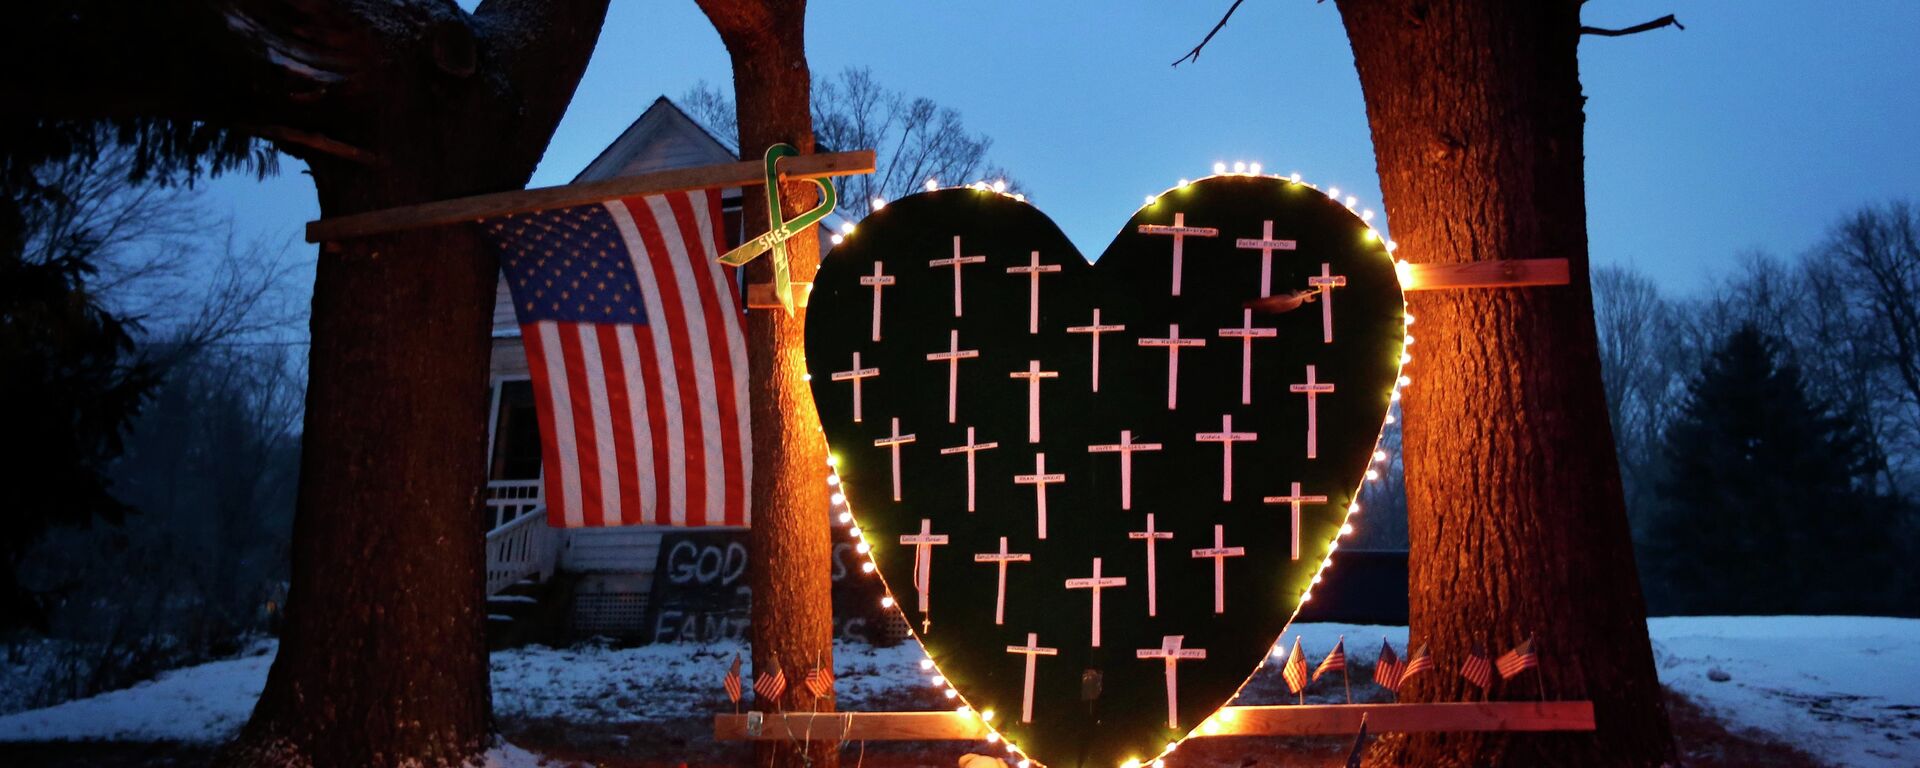 A memorial to the victims of the December 2012 shootings at Sandy Hook Elementary School. Residents of Newtown, Conn. say the shooter's home is a a constant reminder of the evil that resided there. - Sputnik International, 1920, 16.02.2022